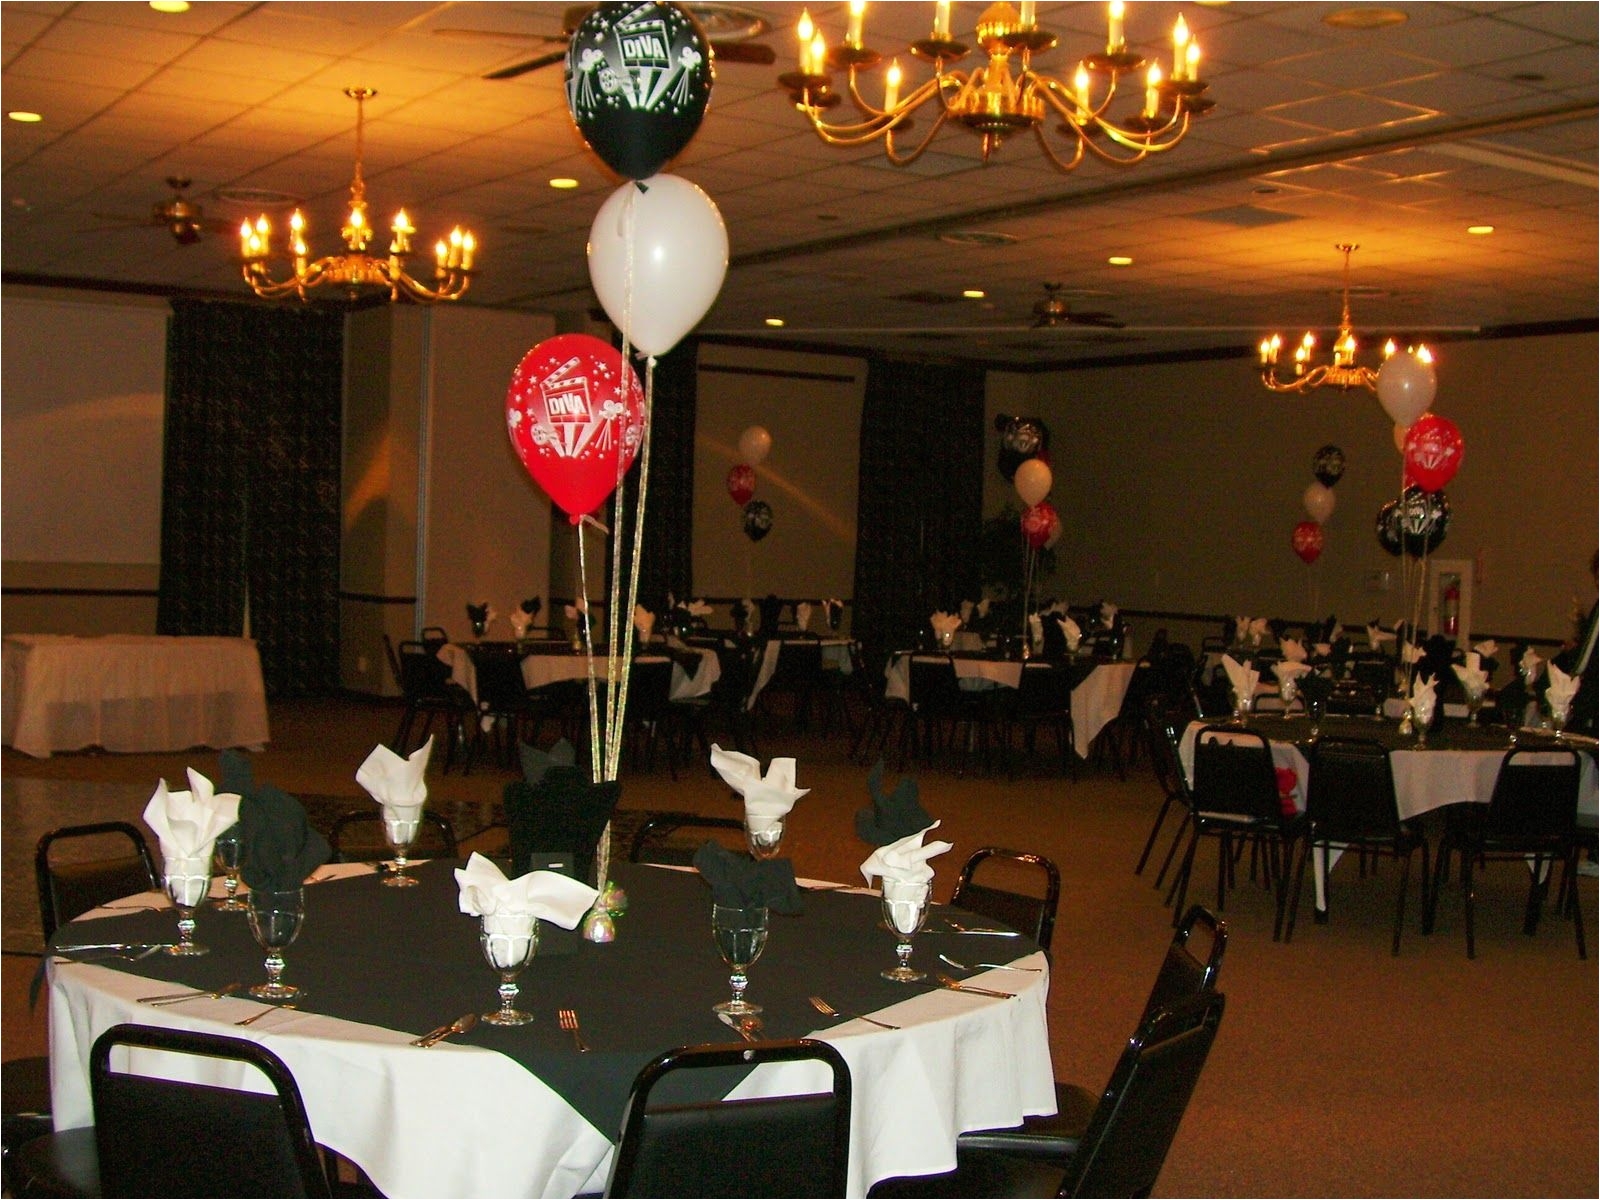 birthday table decorations centerpieces 40th birthday party balloon decorations celebrate the day with